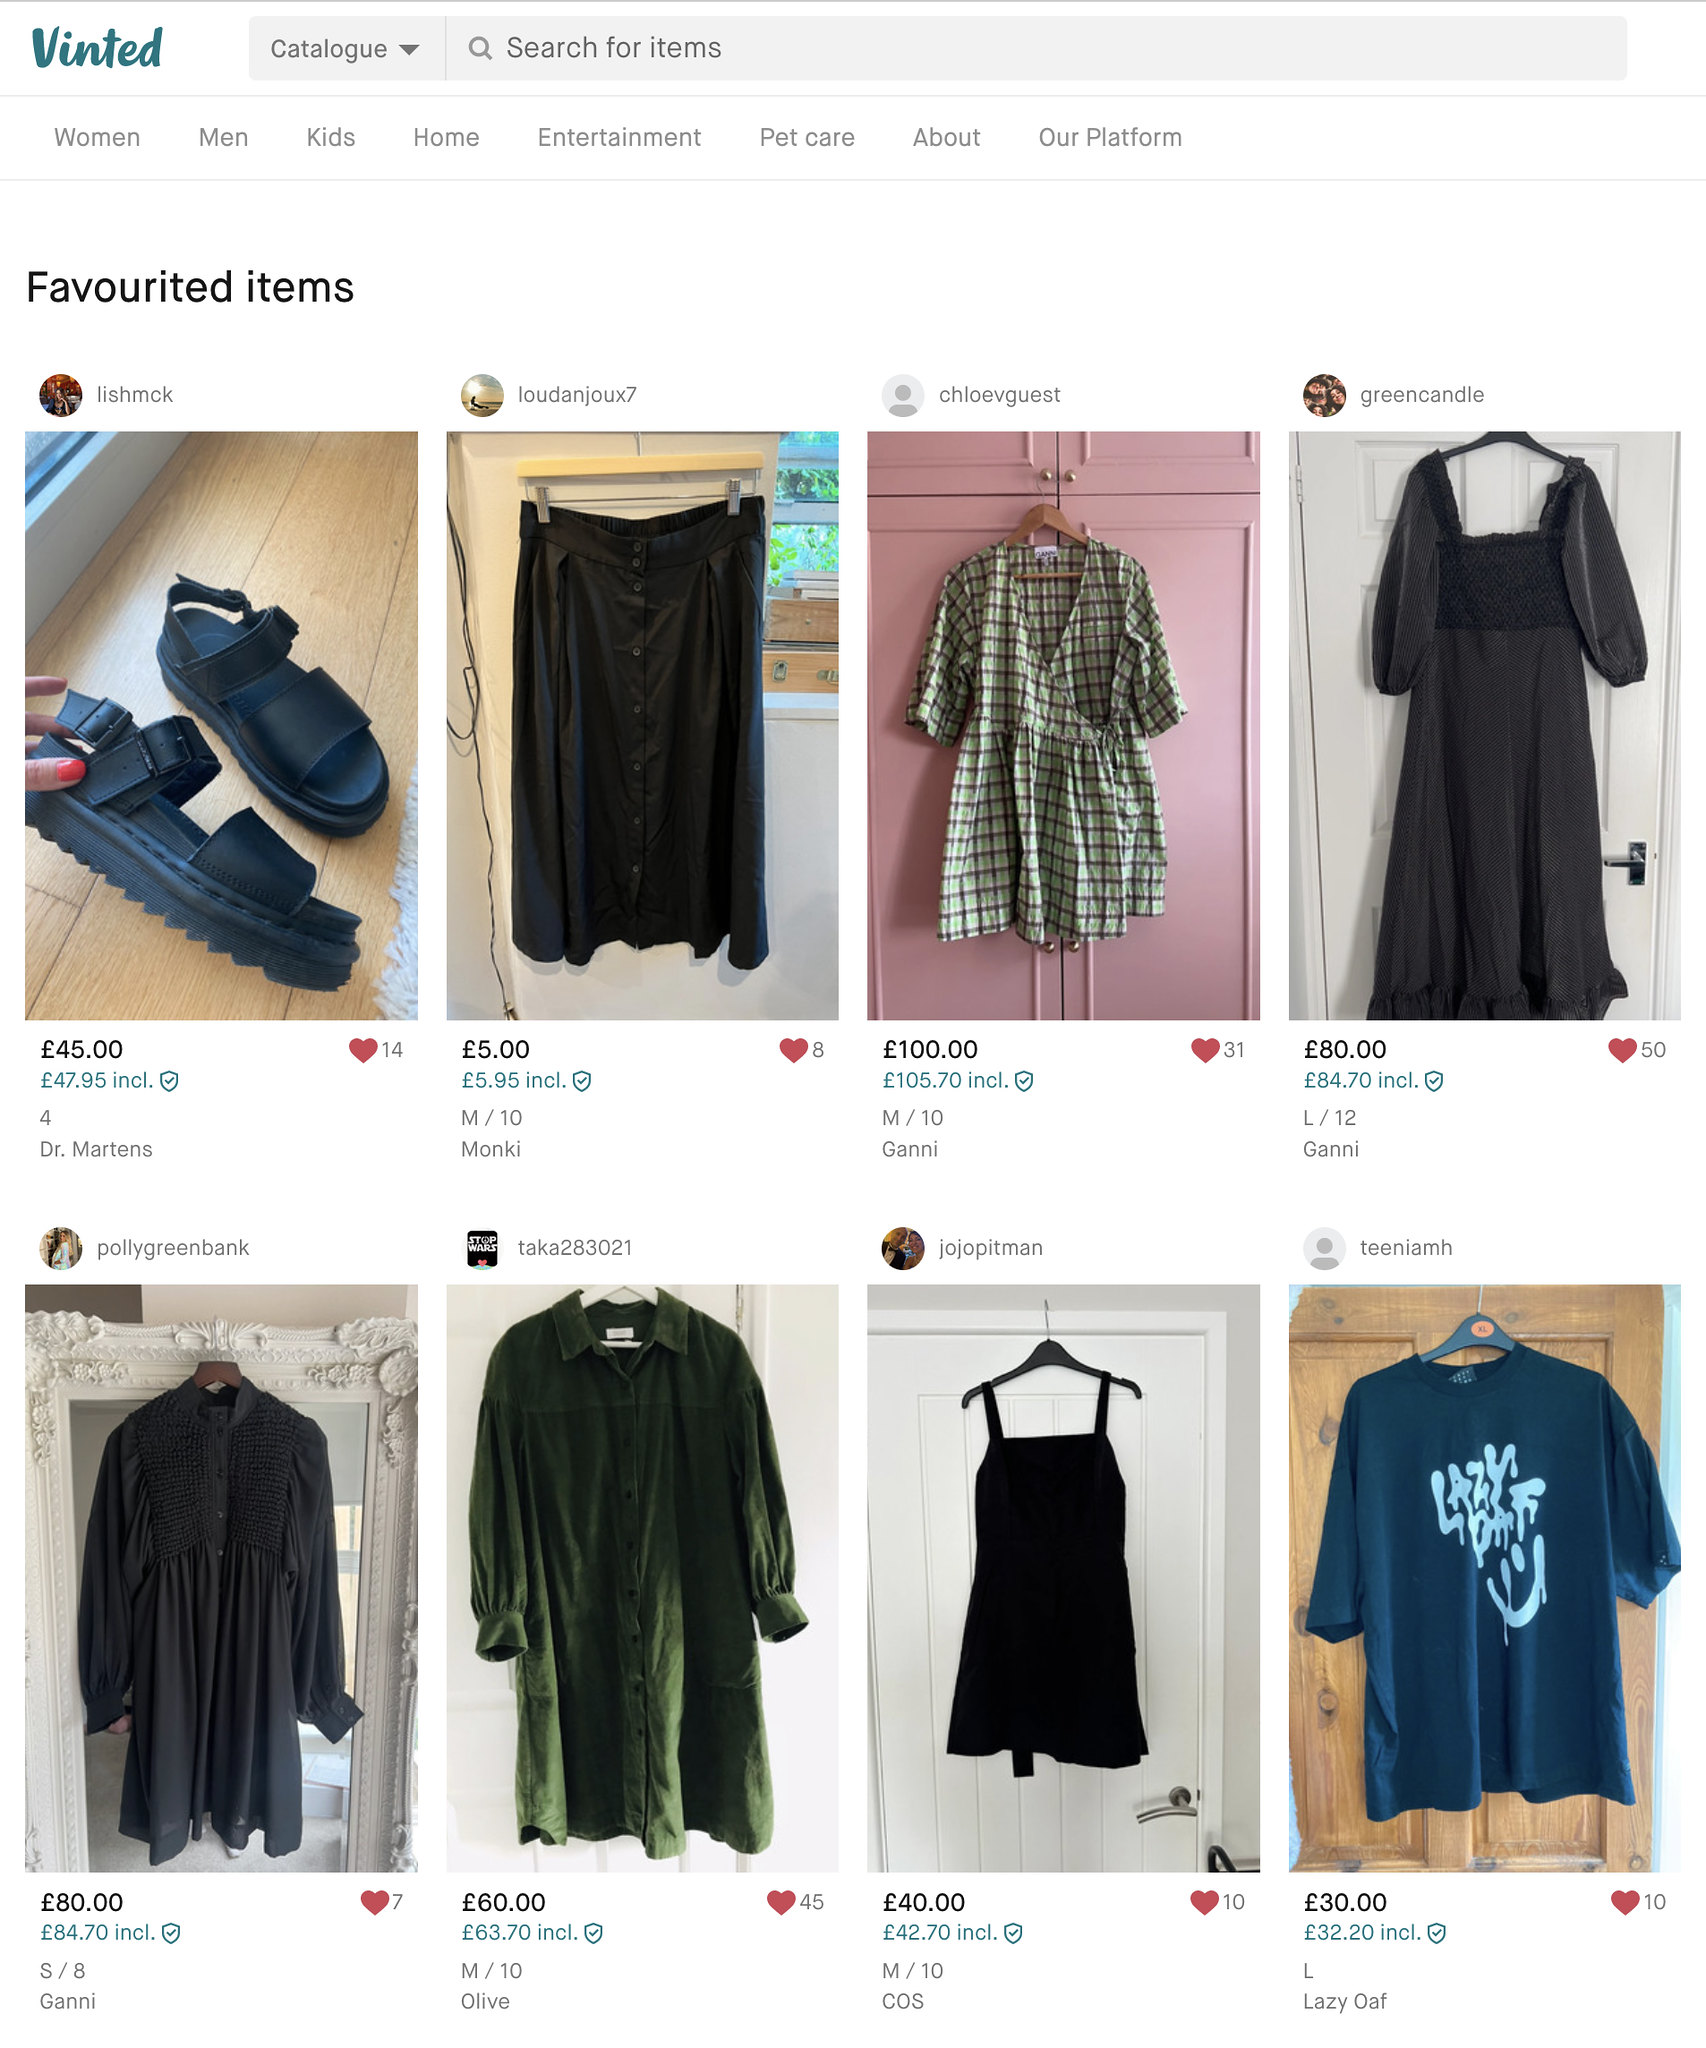 How to Buy on Vinted